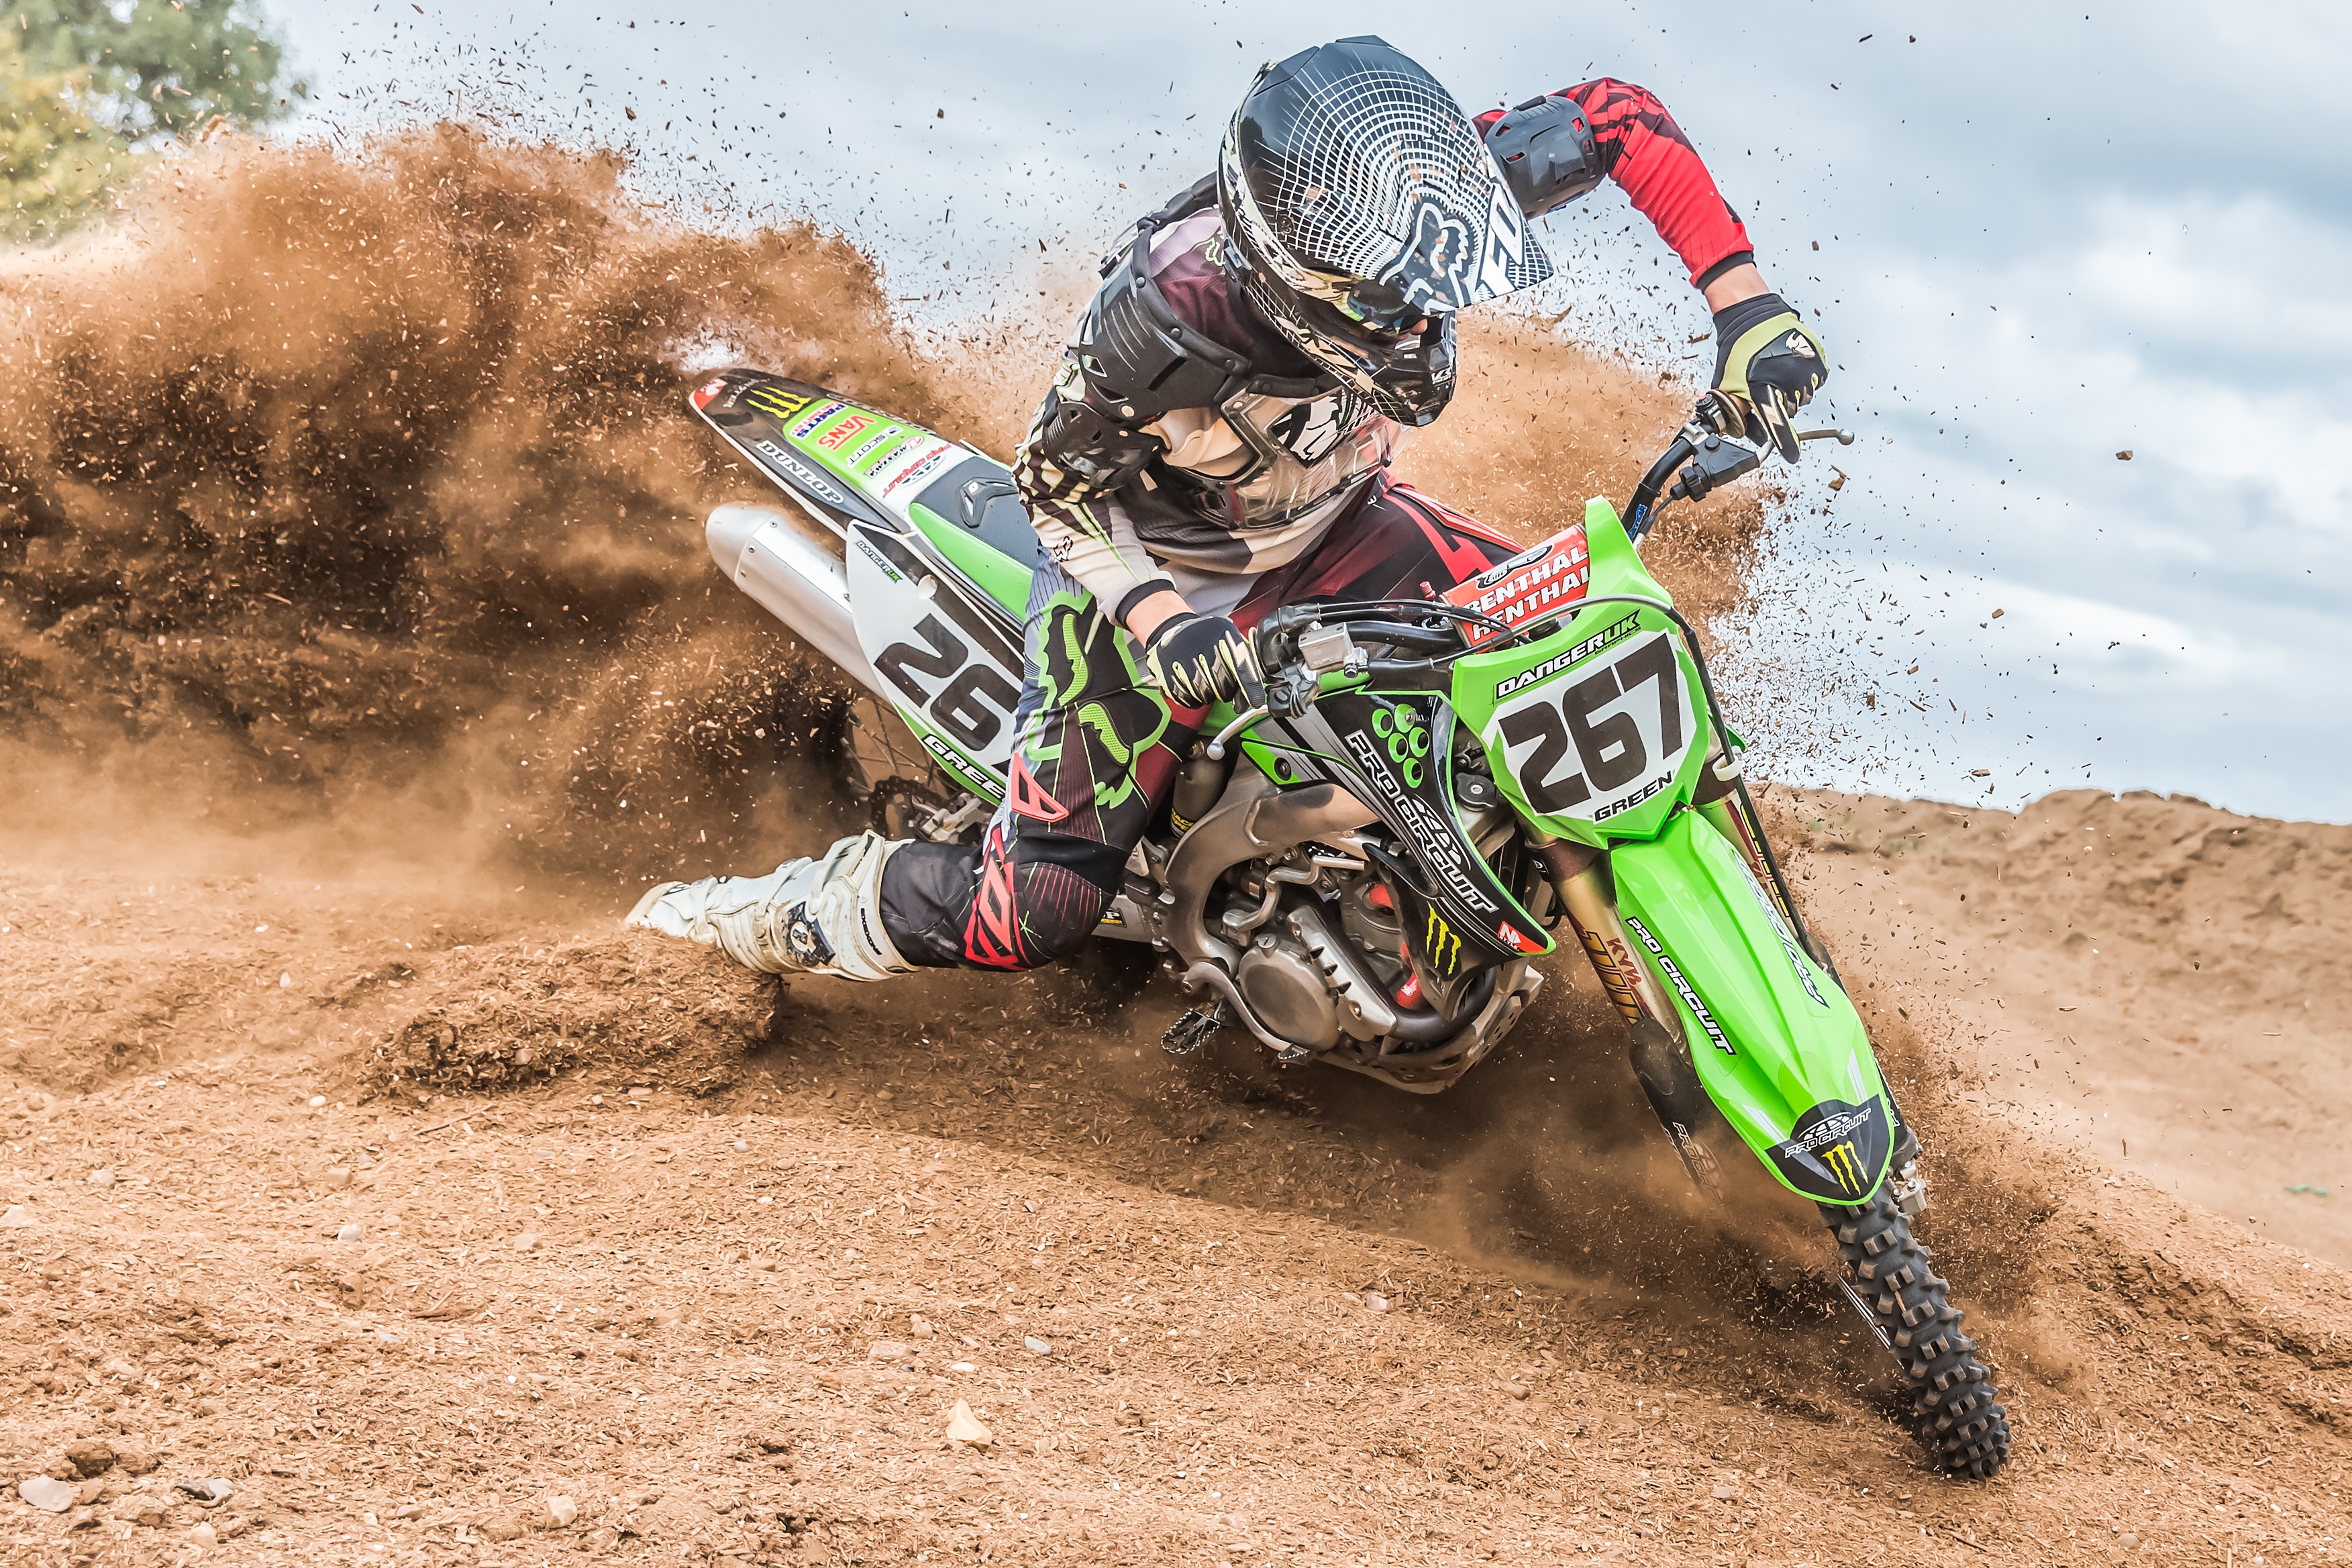 sports, motocross, dirt, motorcycle, vehicle